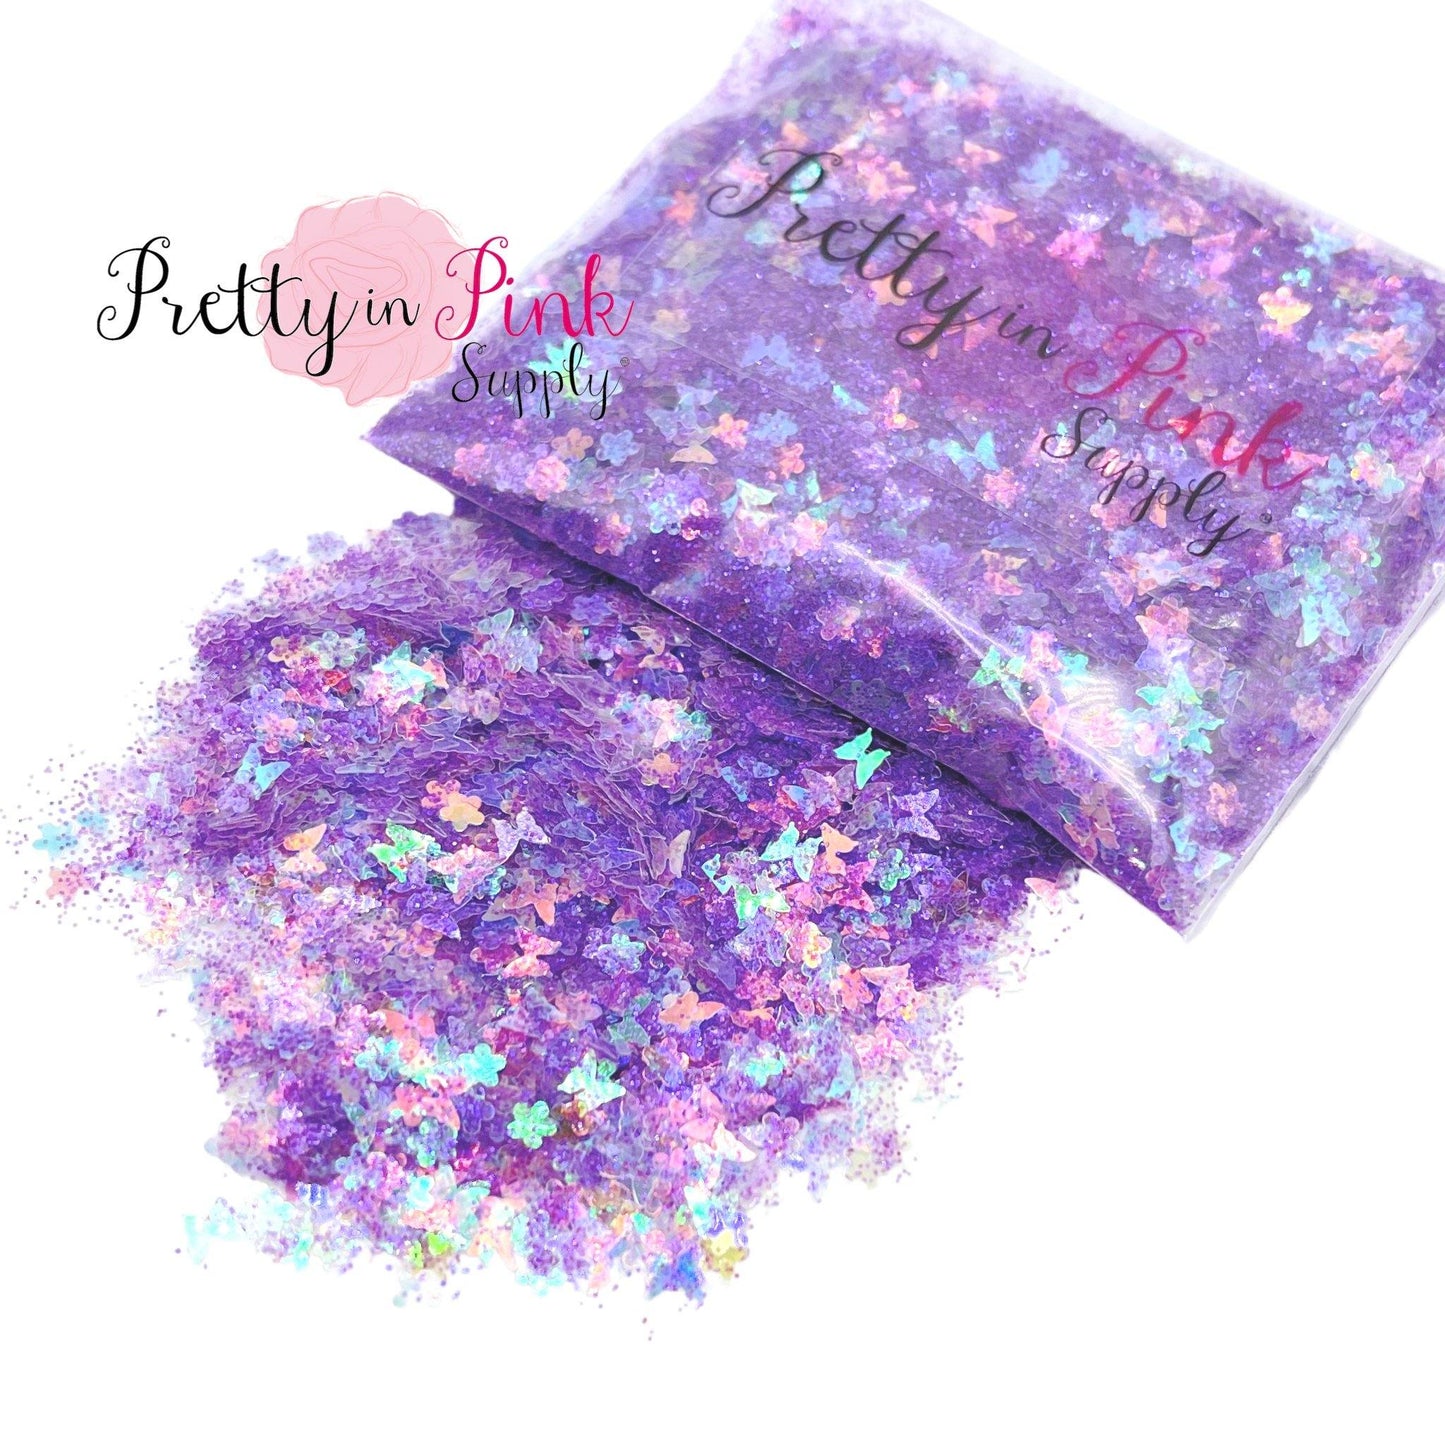 Purple Flower Butterfly Iridescent Chunky/Fine Mix | Glitter - Pretty in Pink Supply